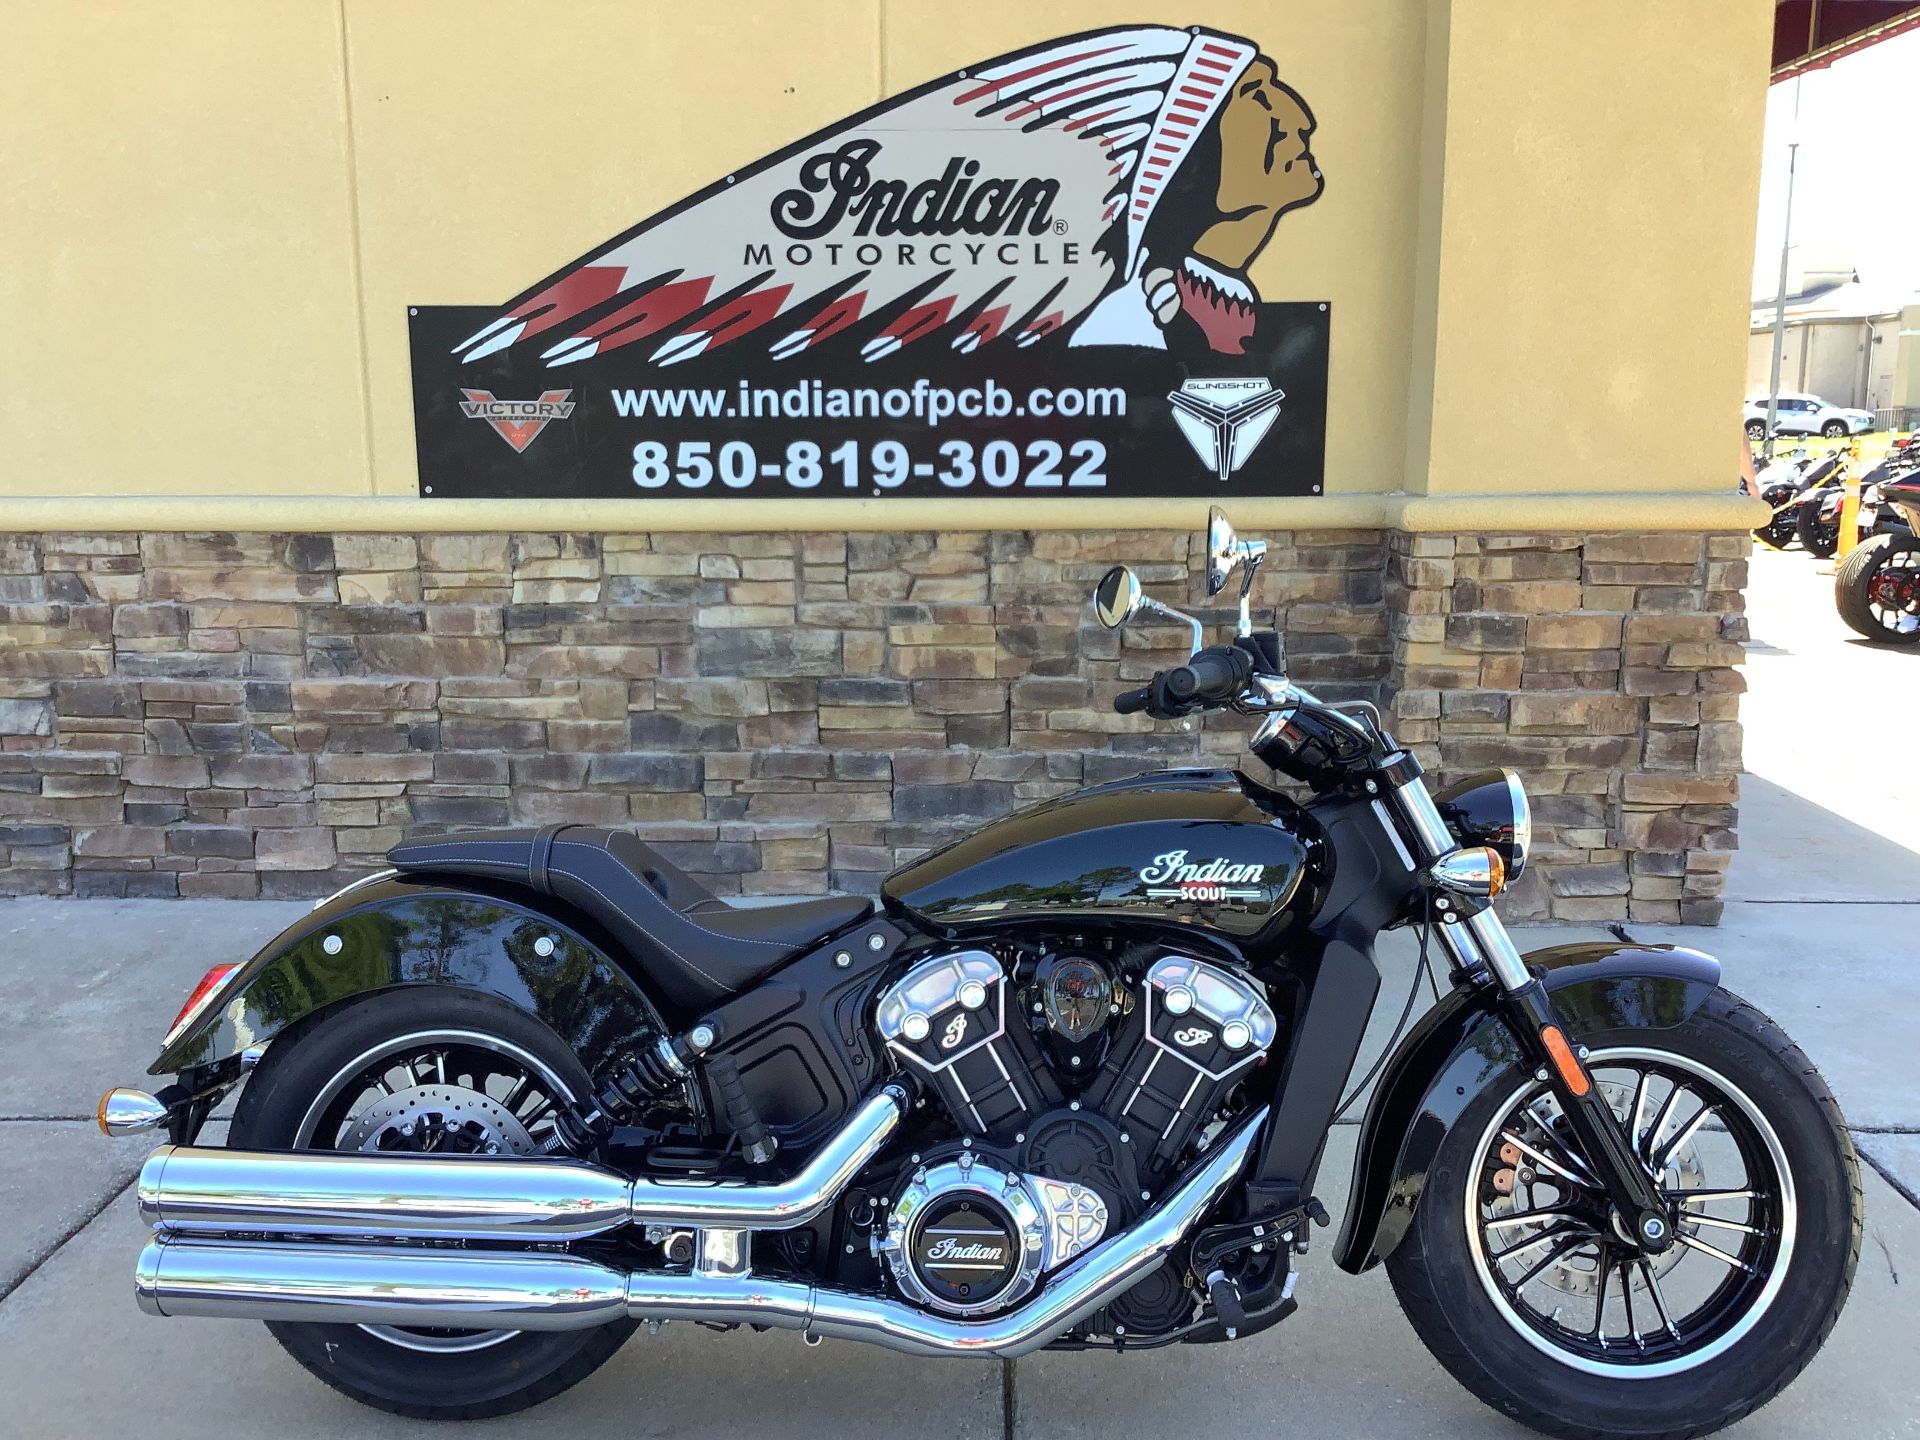 2022 Indian SCOUT NON ABS in Panama City Beach, Florida - Photo 1